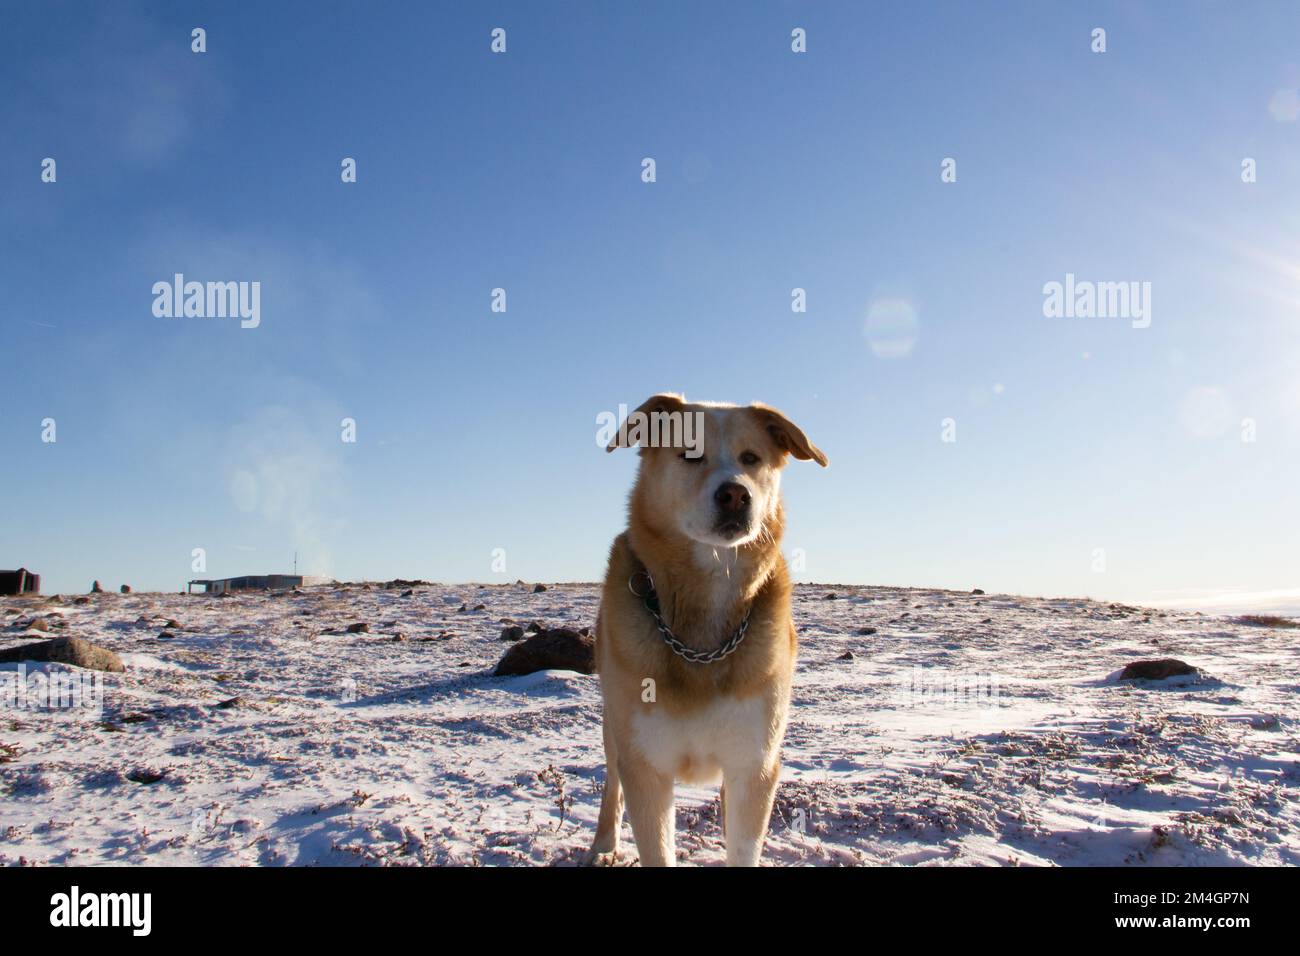 A yellow Labrador dog standing on snow in a cold arctic landscape, near Arviat, Nunavut Canada Stock Photo